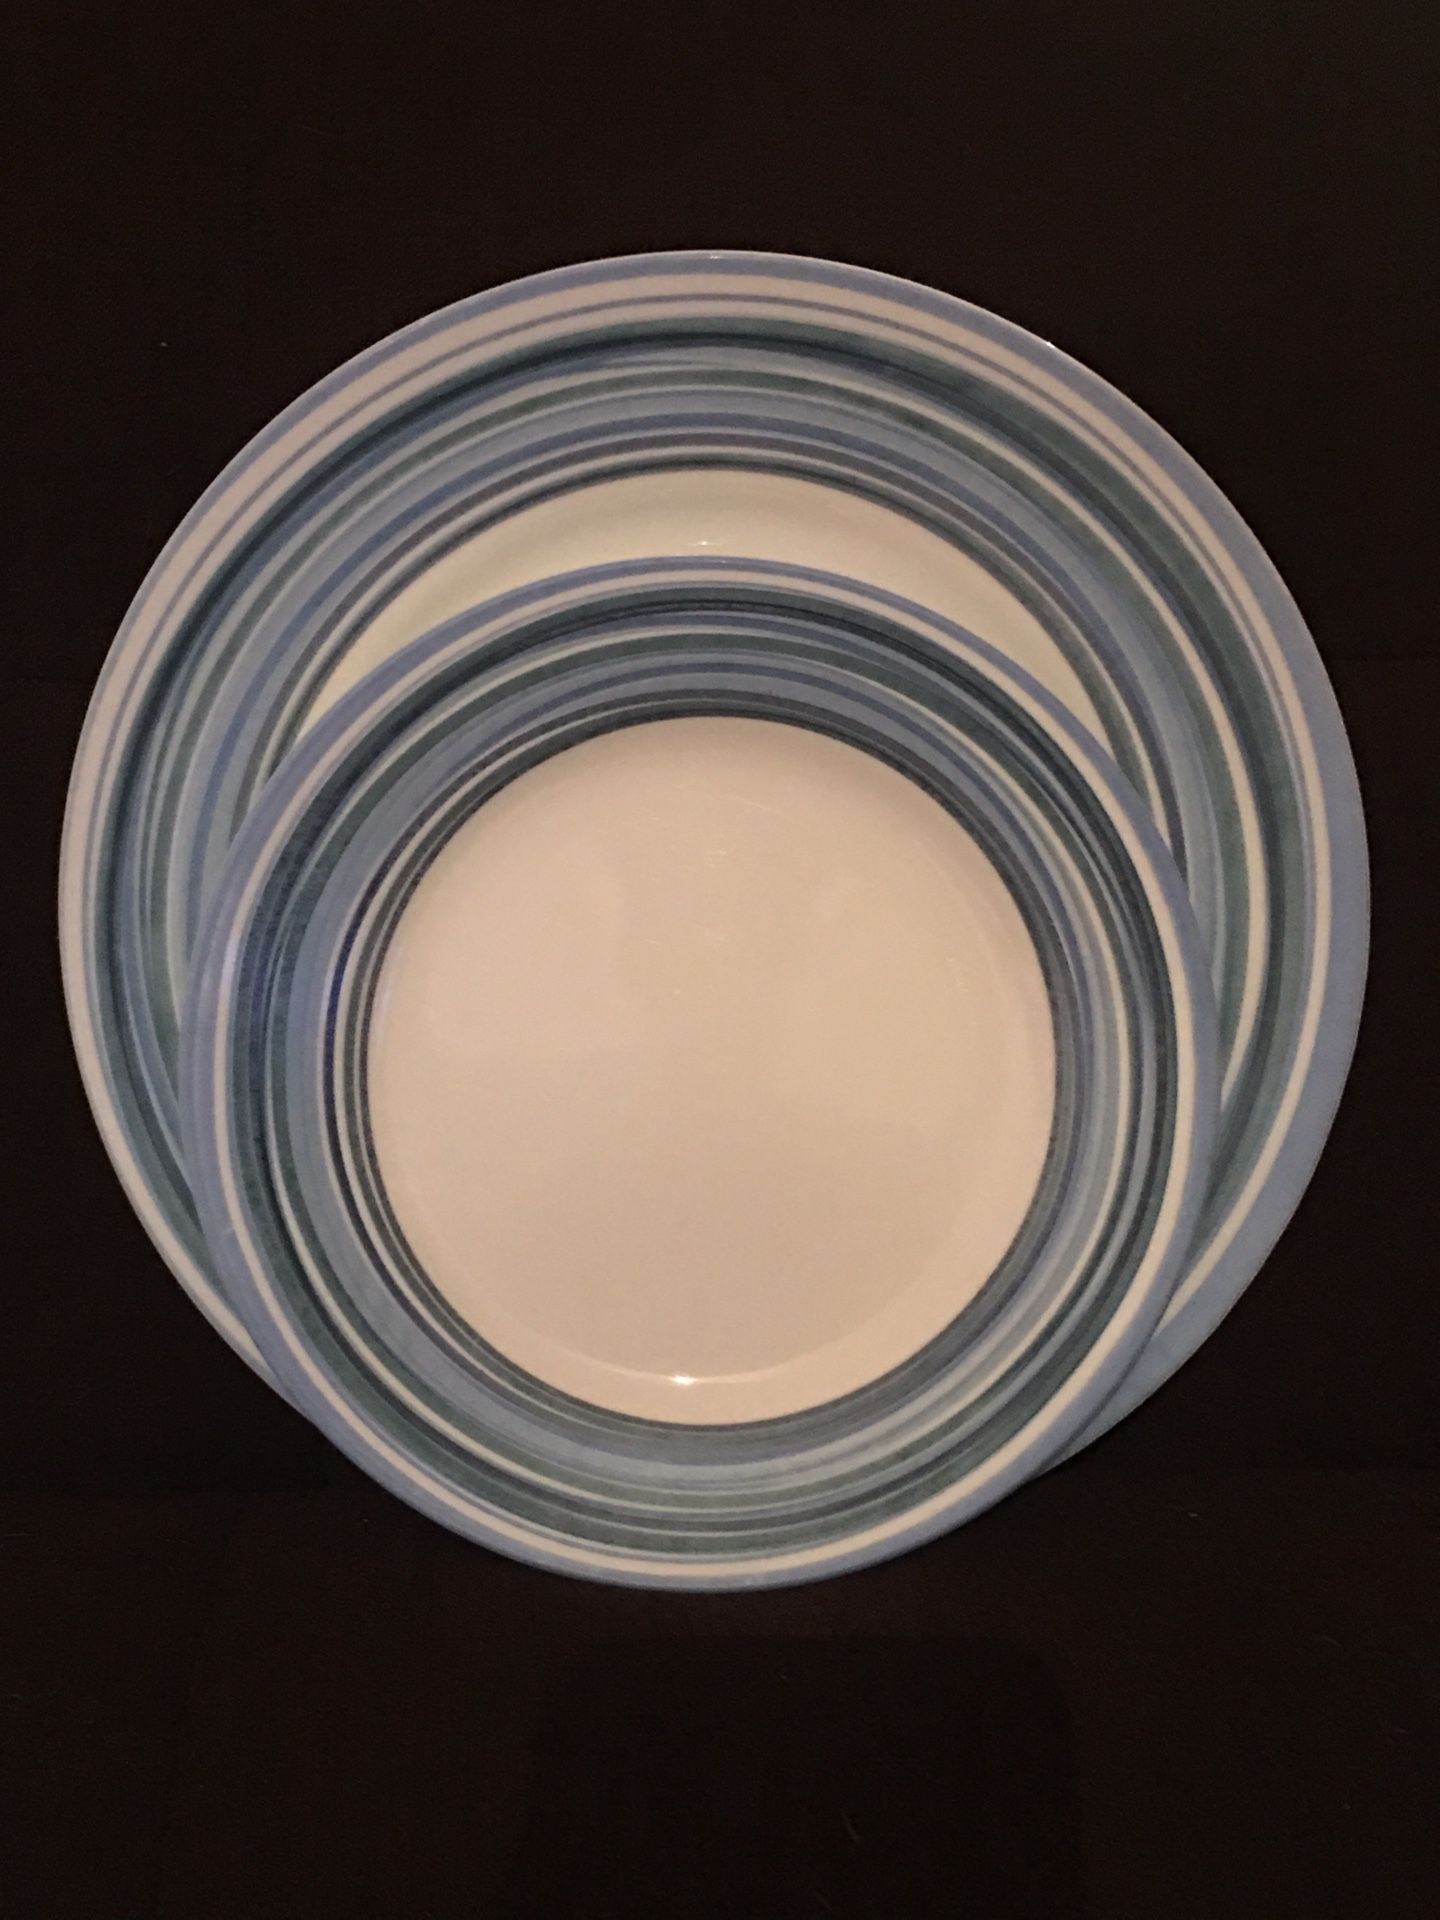 Set of 4 Corelle Dinner Plates & 4 Matching Smaller Plates—Cool Blue Striped Border